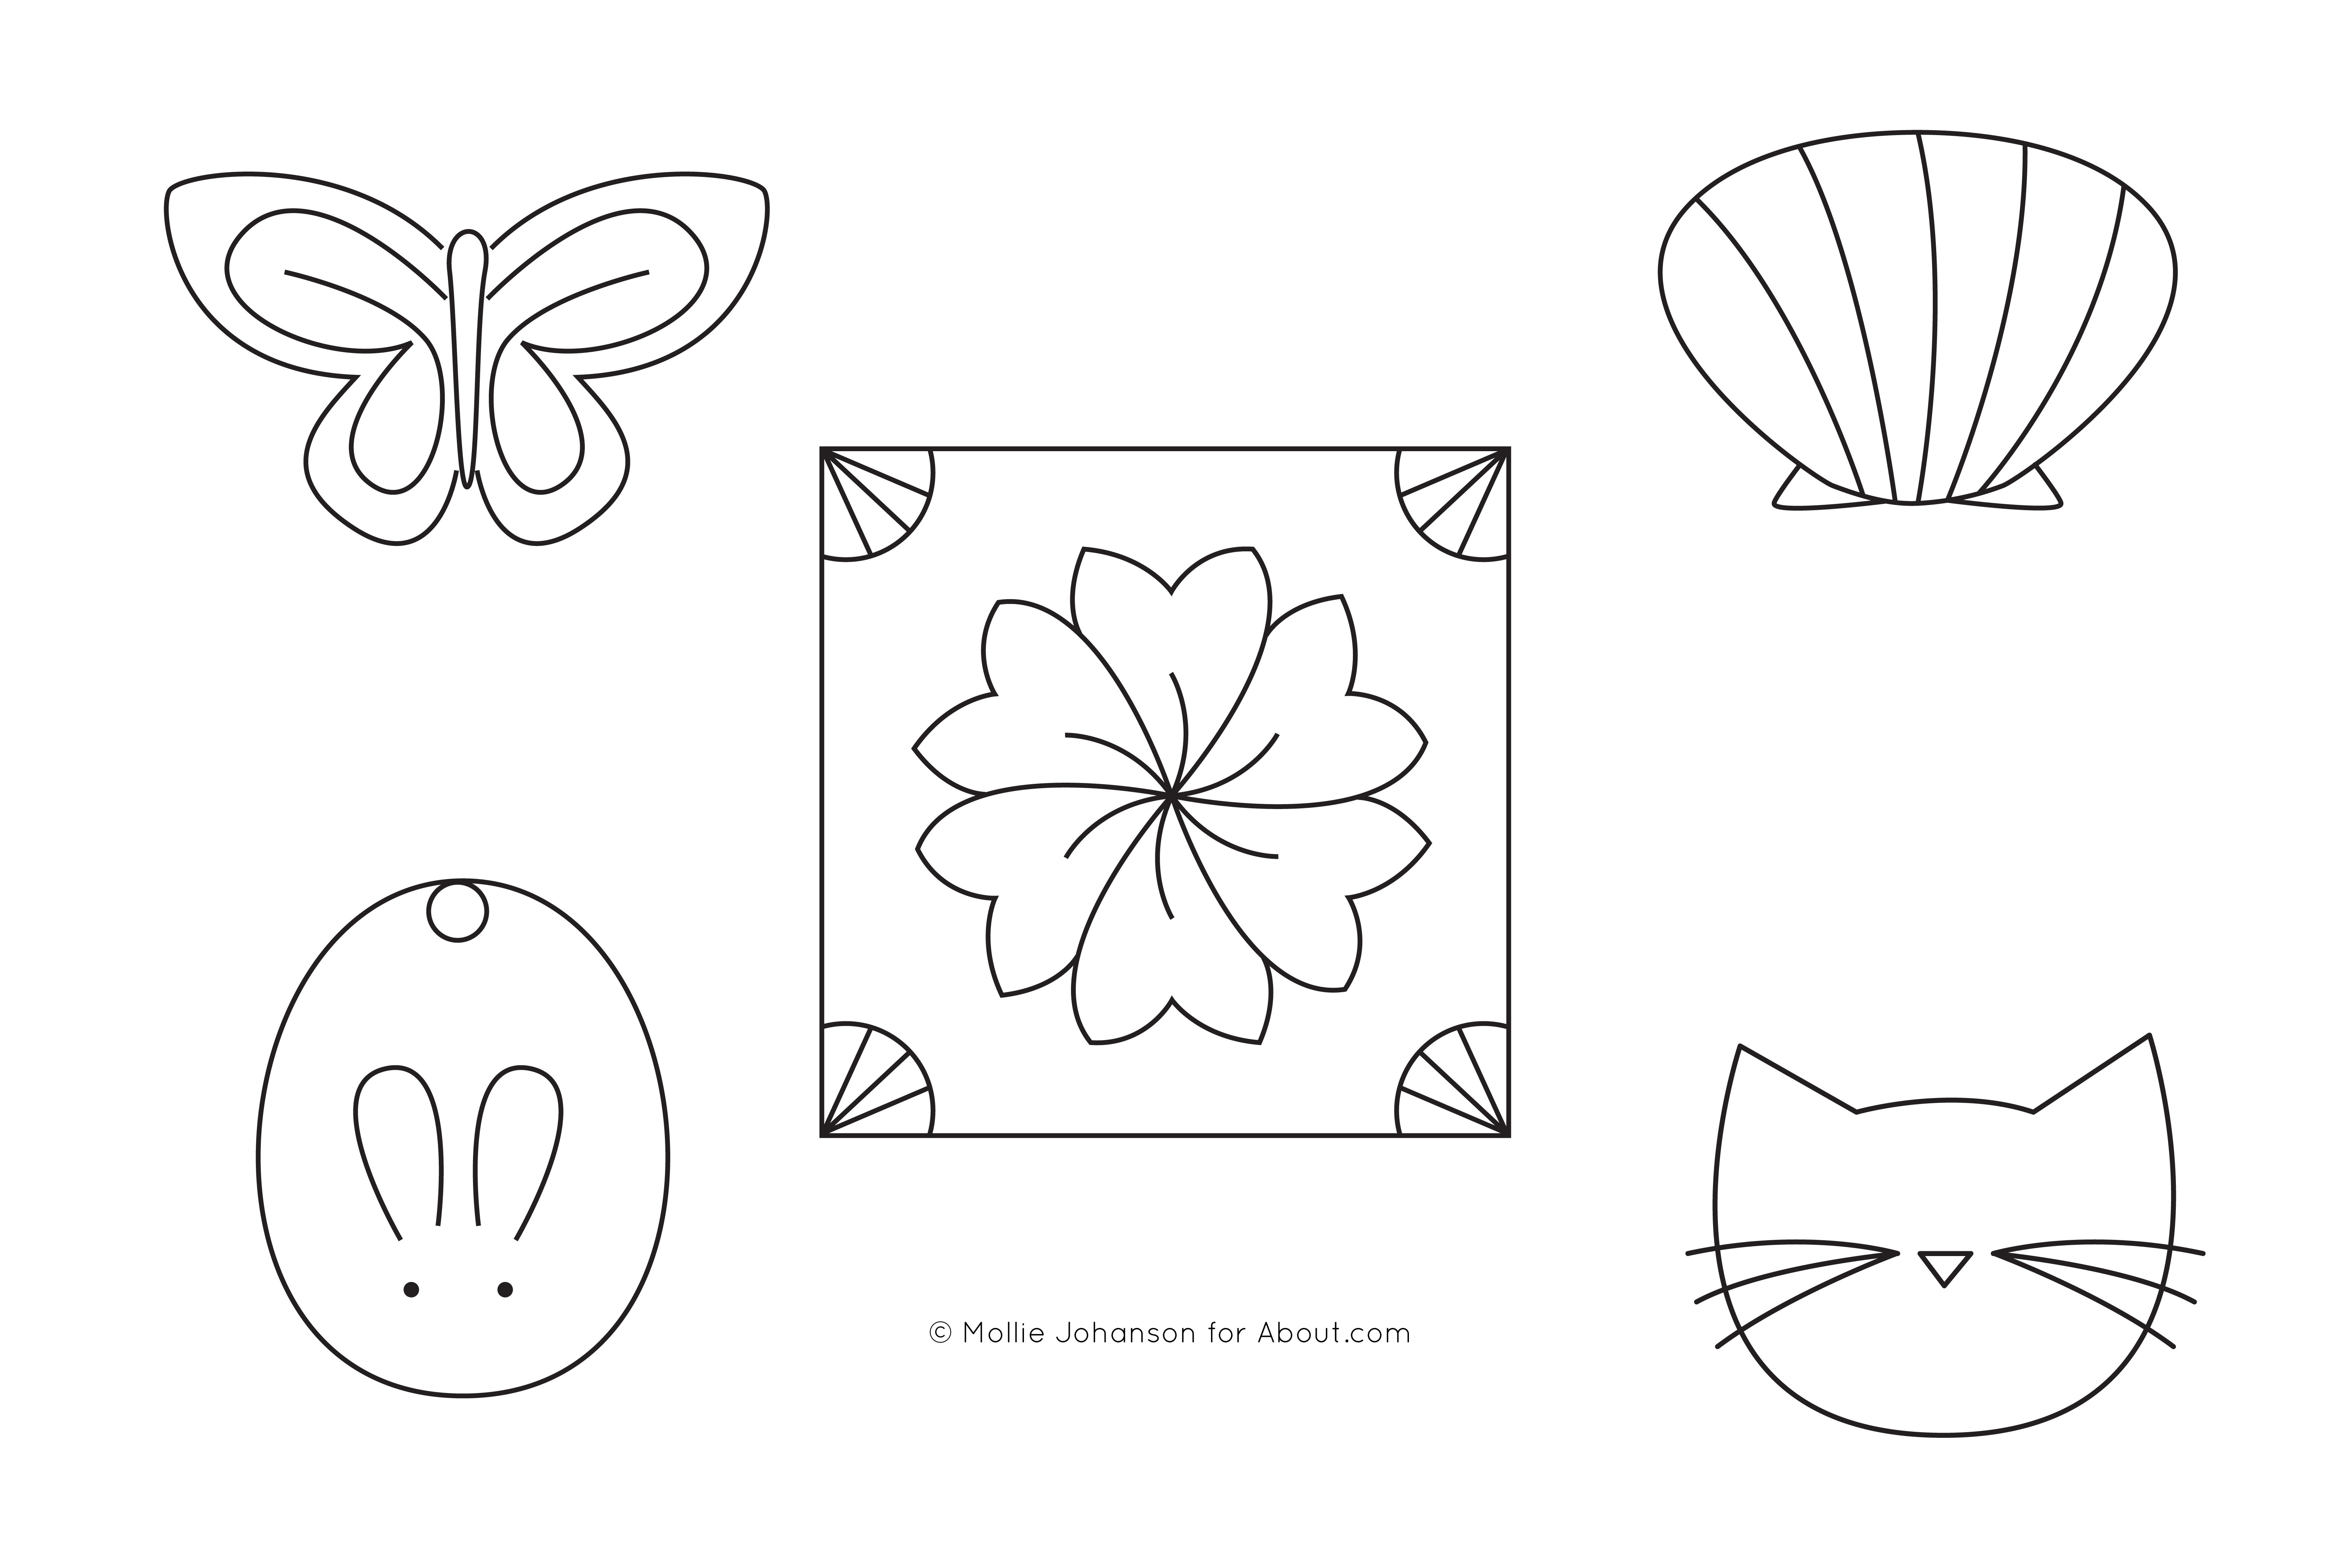 Custom Embroidery Patterns Simple Single Patterns For Sashiko Embroidery